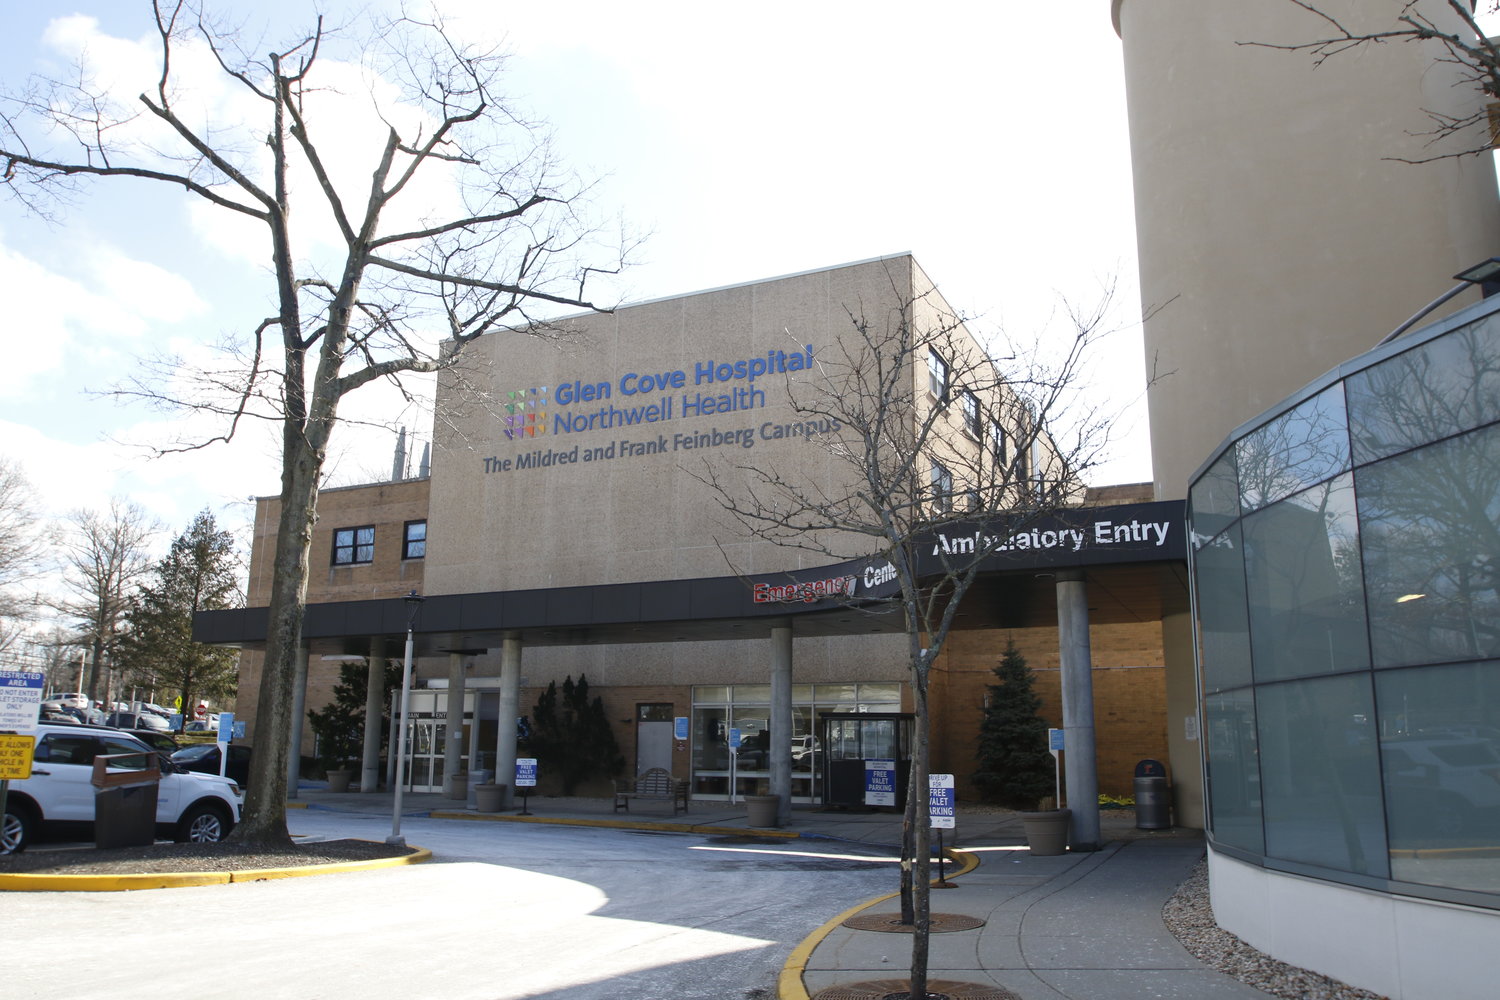 Glen Cove Hospital has seen an increase in Covid-19 patients in recent weeks.